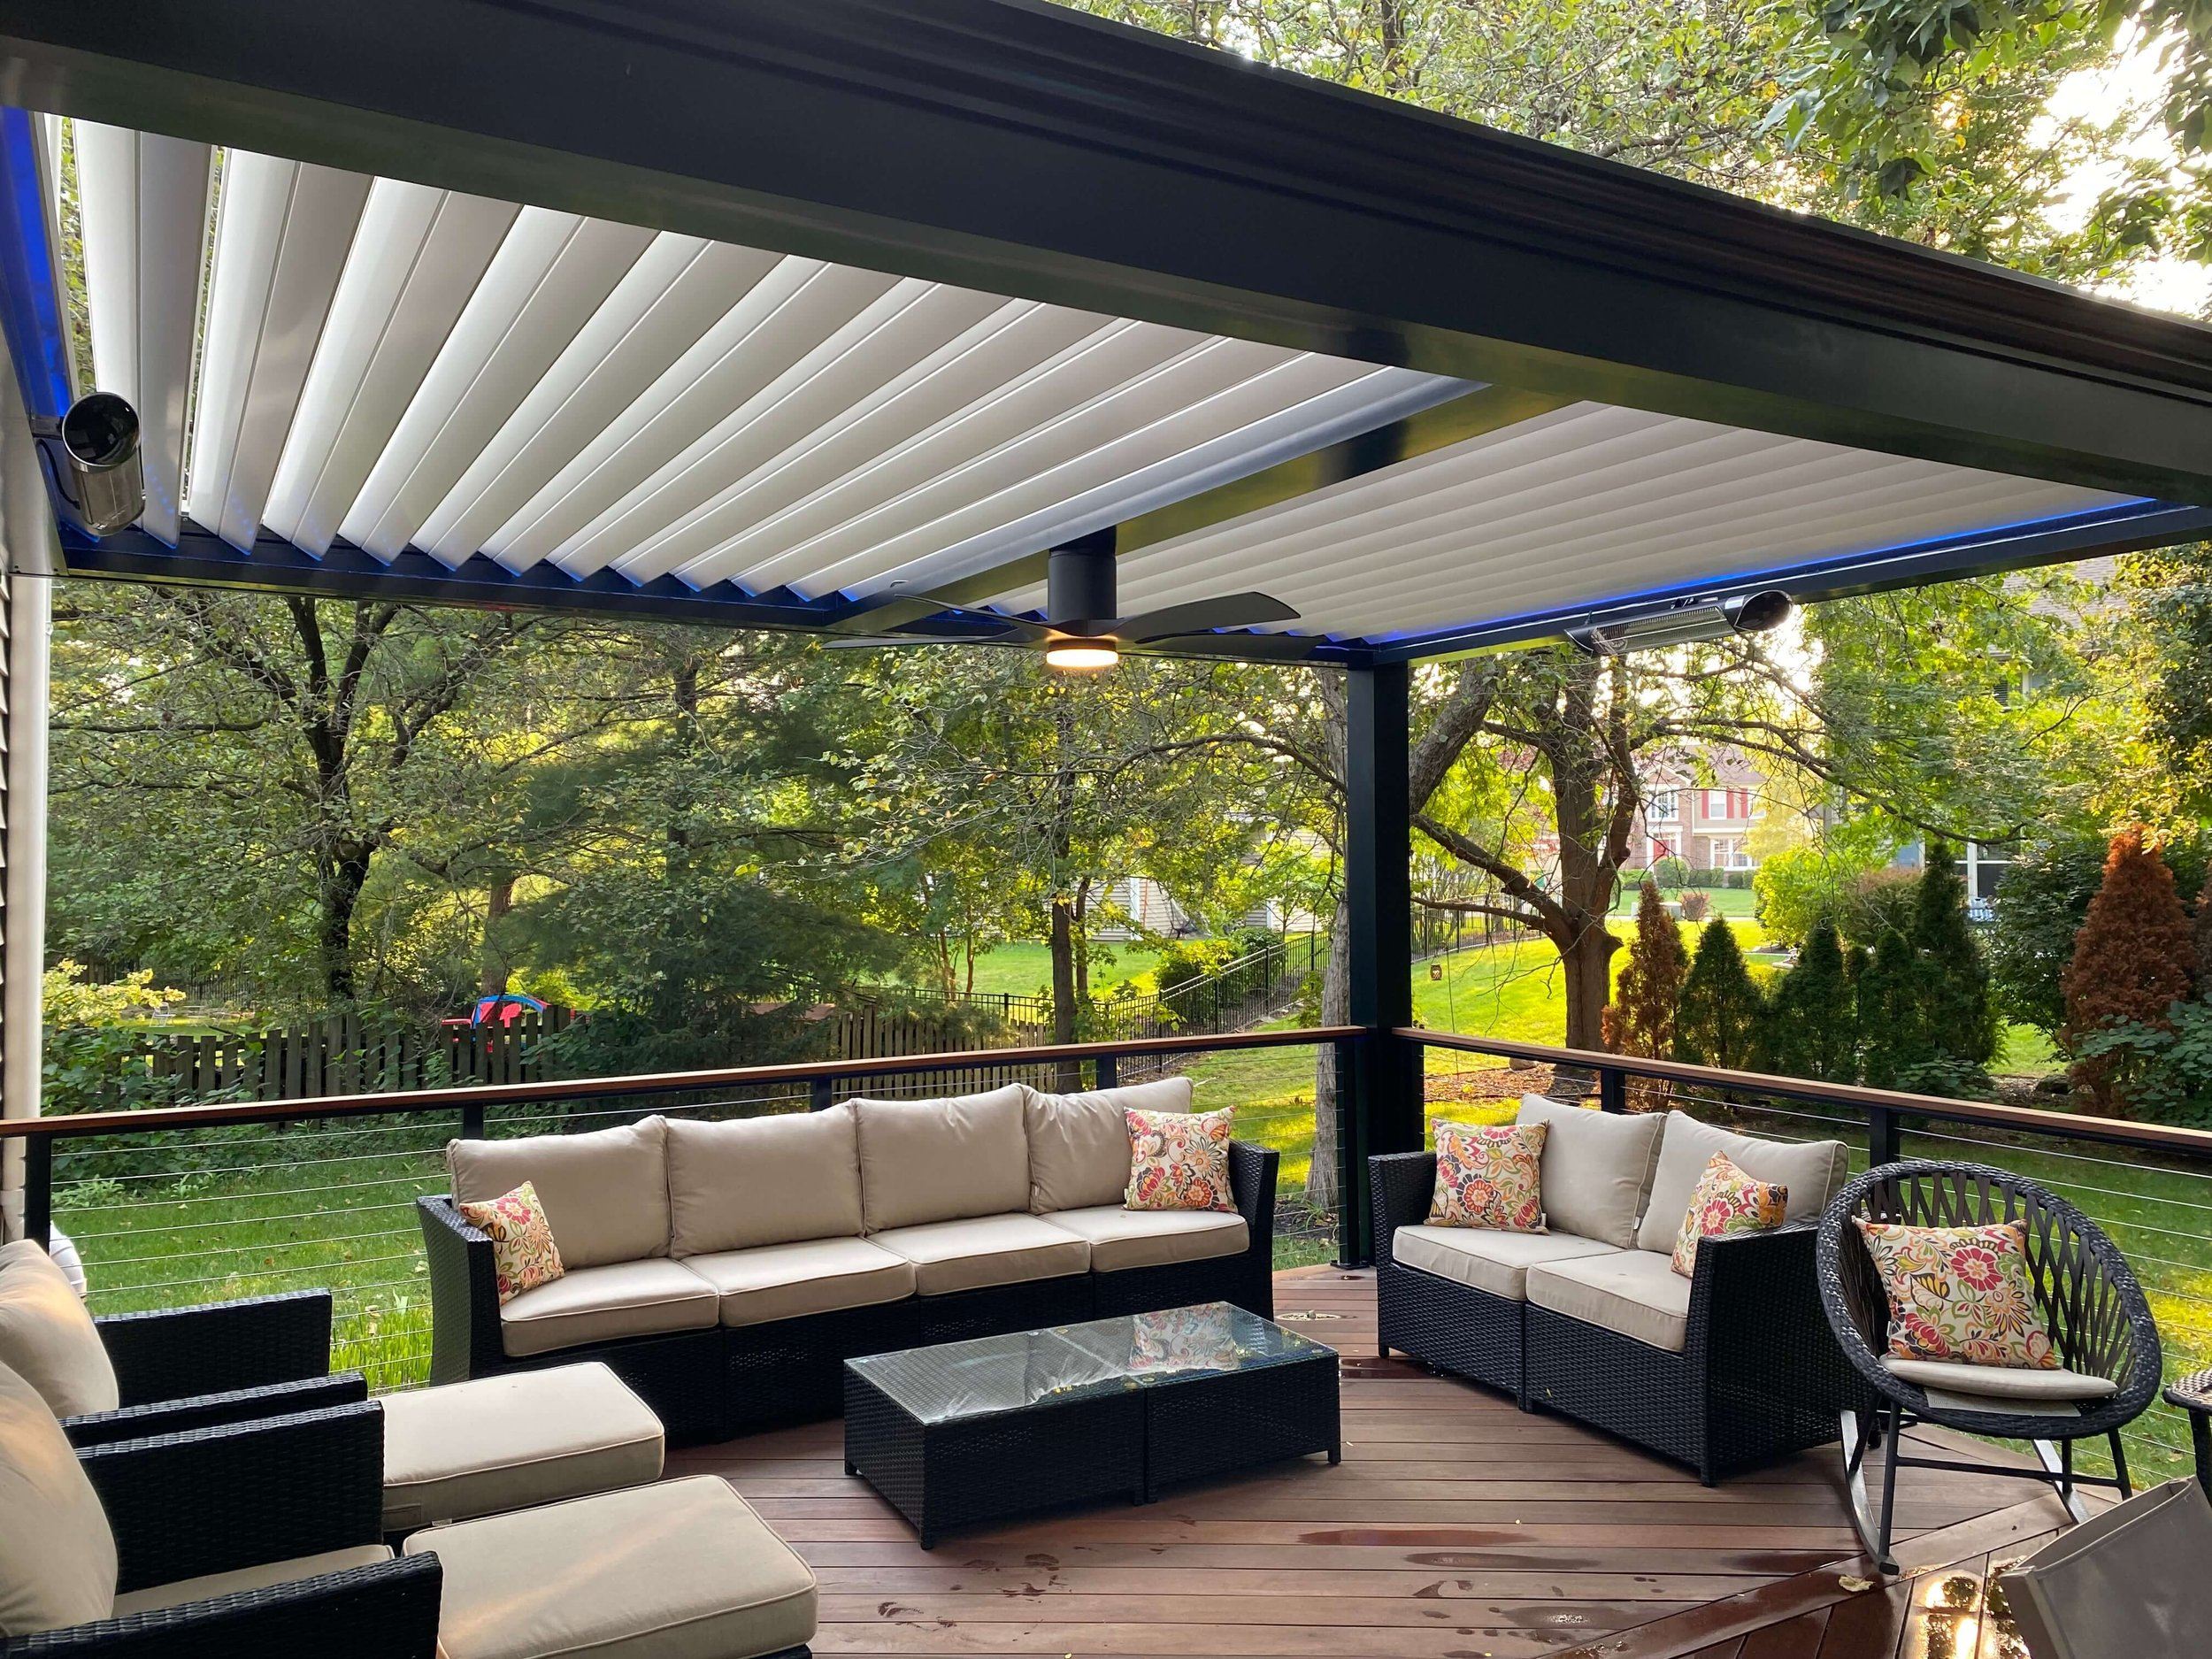 A beautiful 4 post pergola.  Perfect for hosting friends and family.